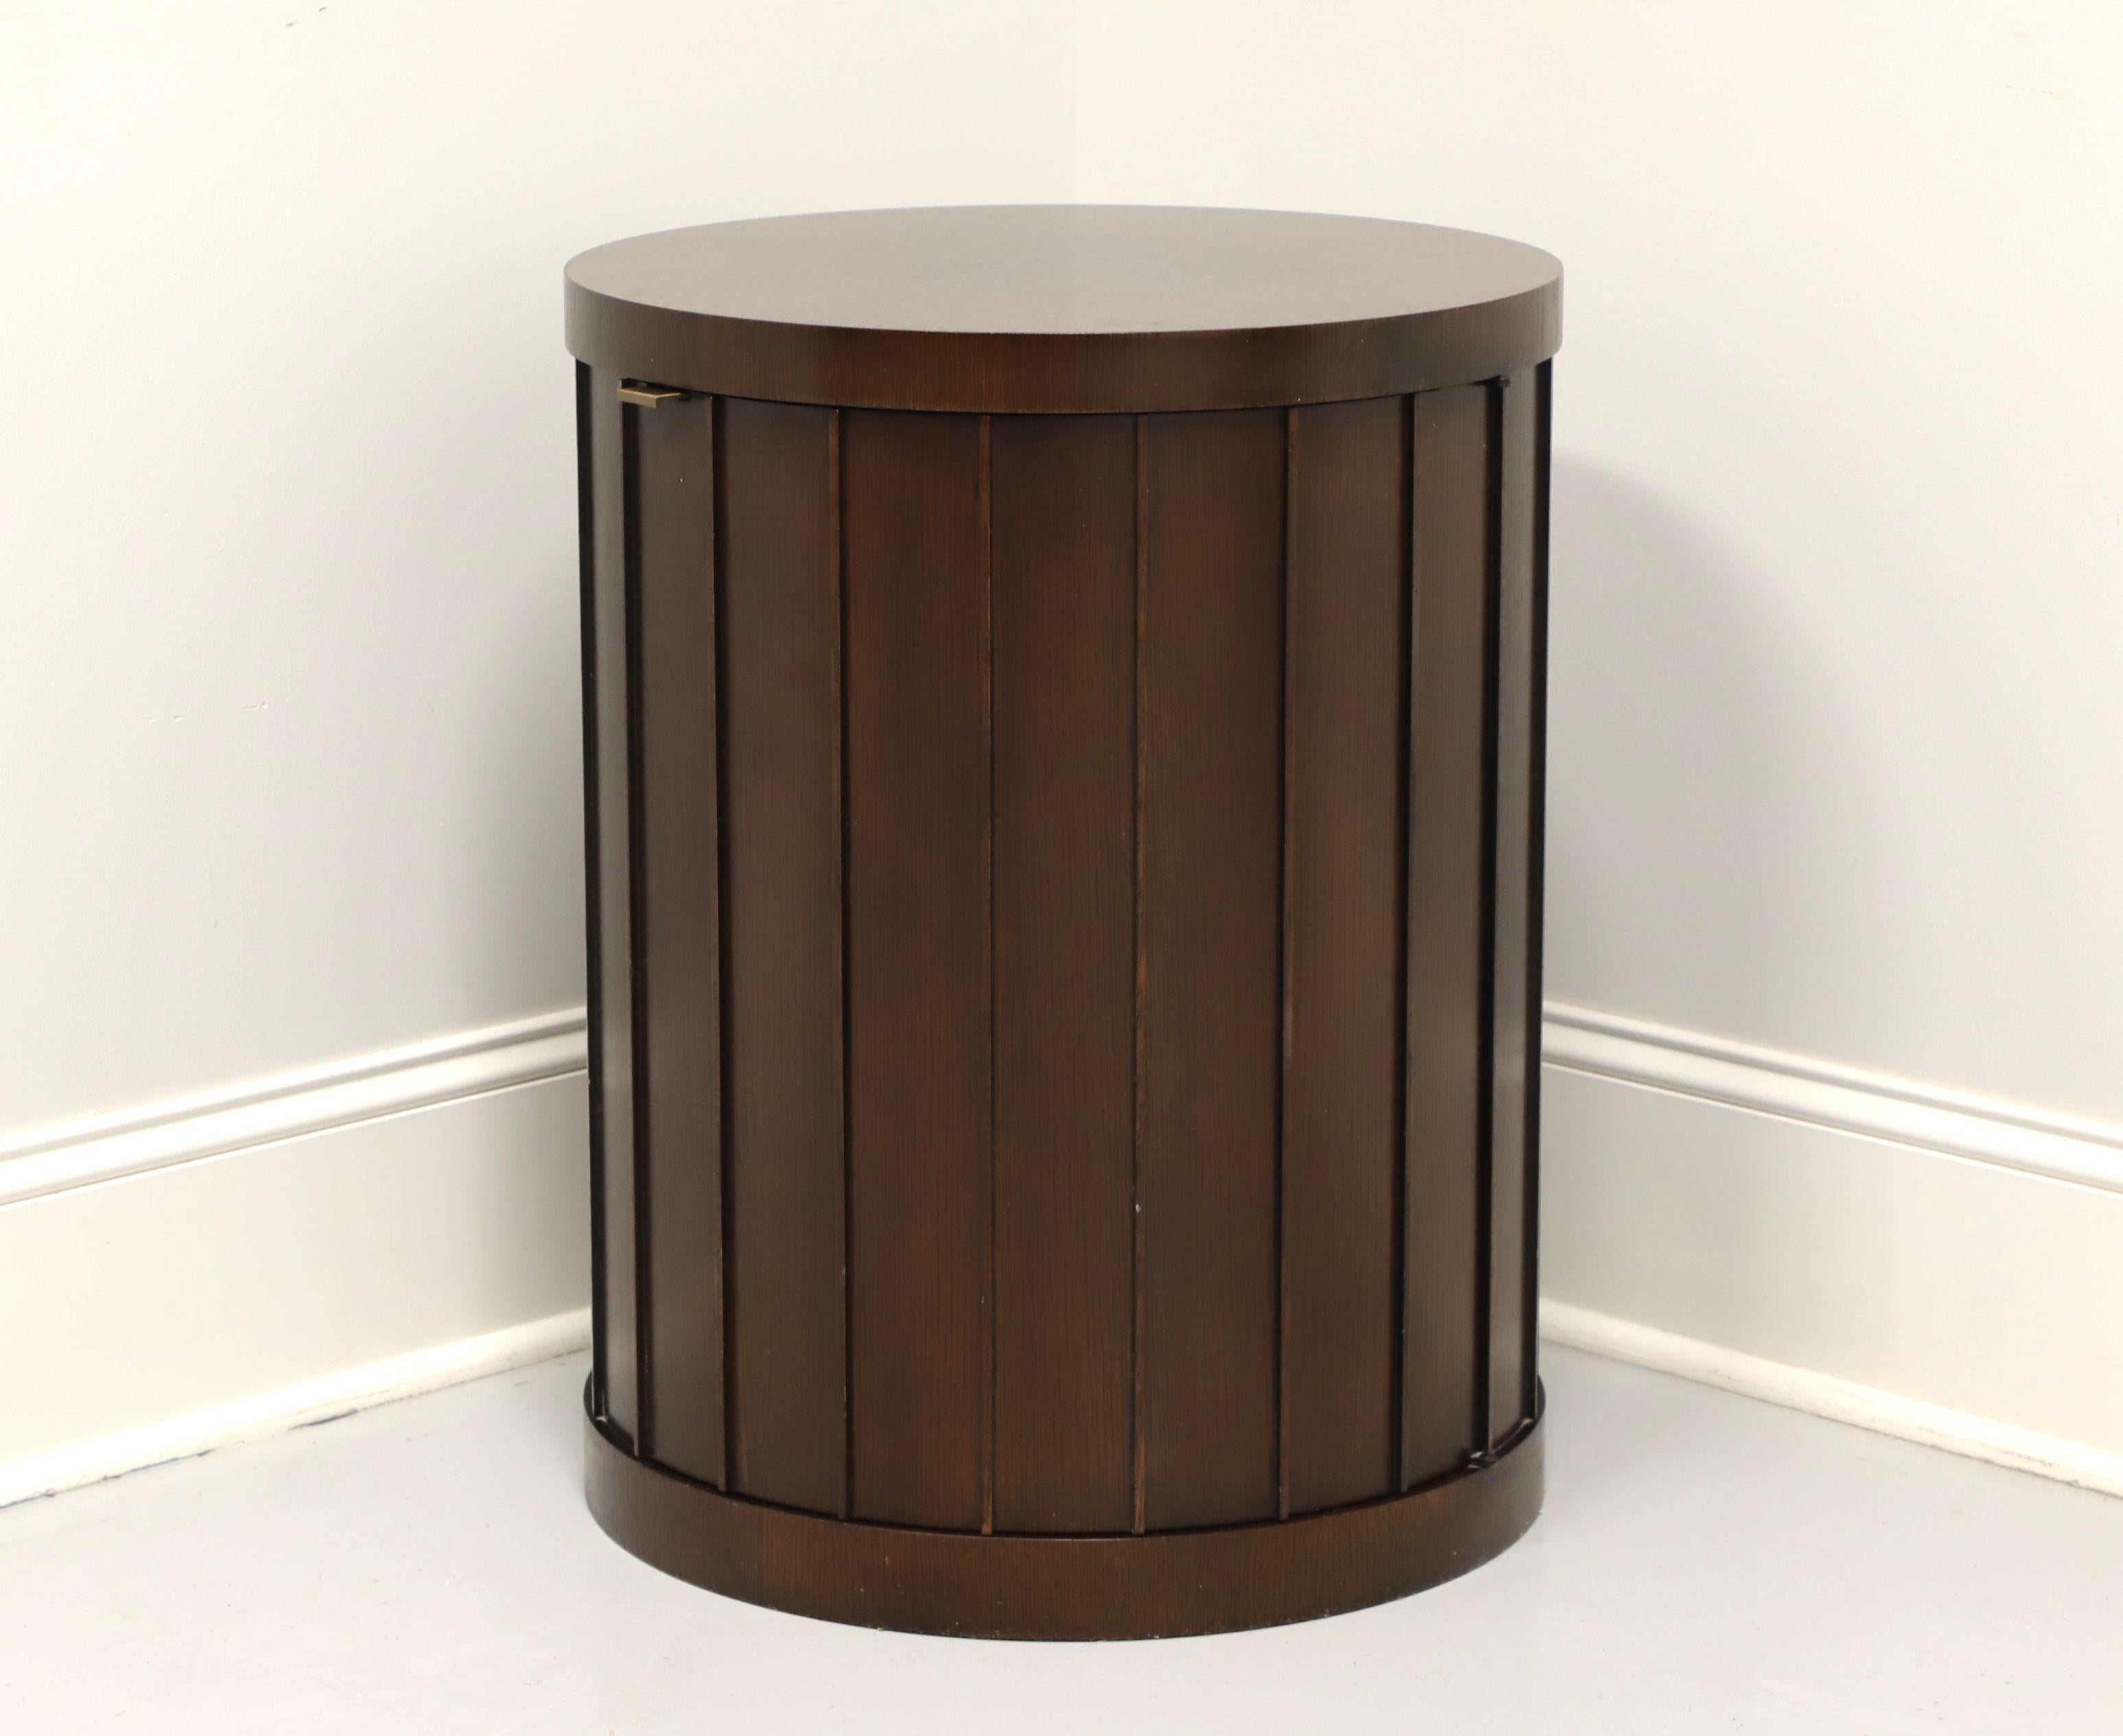 A Contemporary style round shaped cabinet accent table by Barbara Barry for Baker Furniture. Solid mahogany with a brass pull, inlaid top and architectural slats base. Features one hidden door revealing an ample interior storage area with one wood